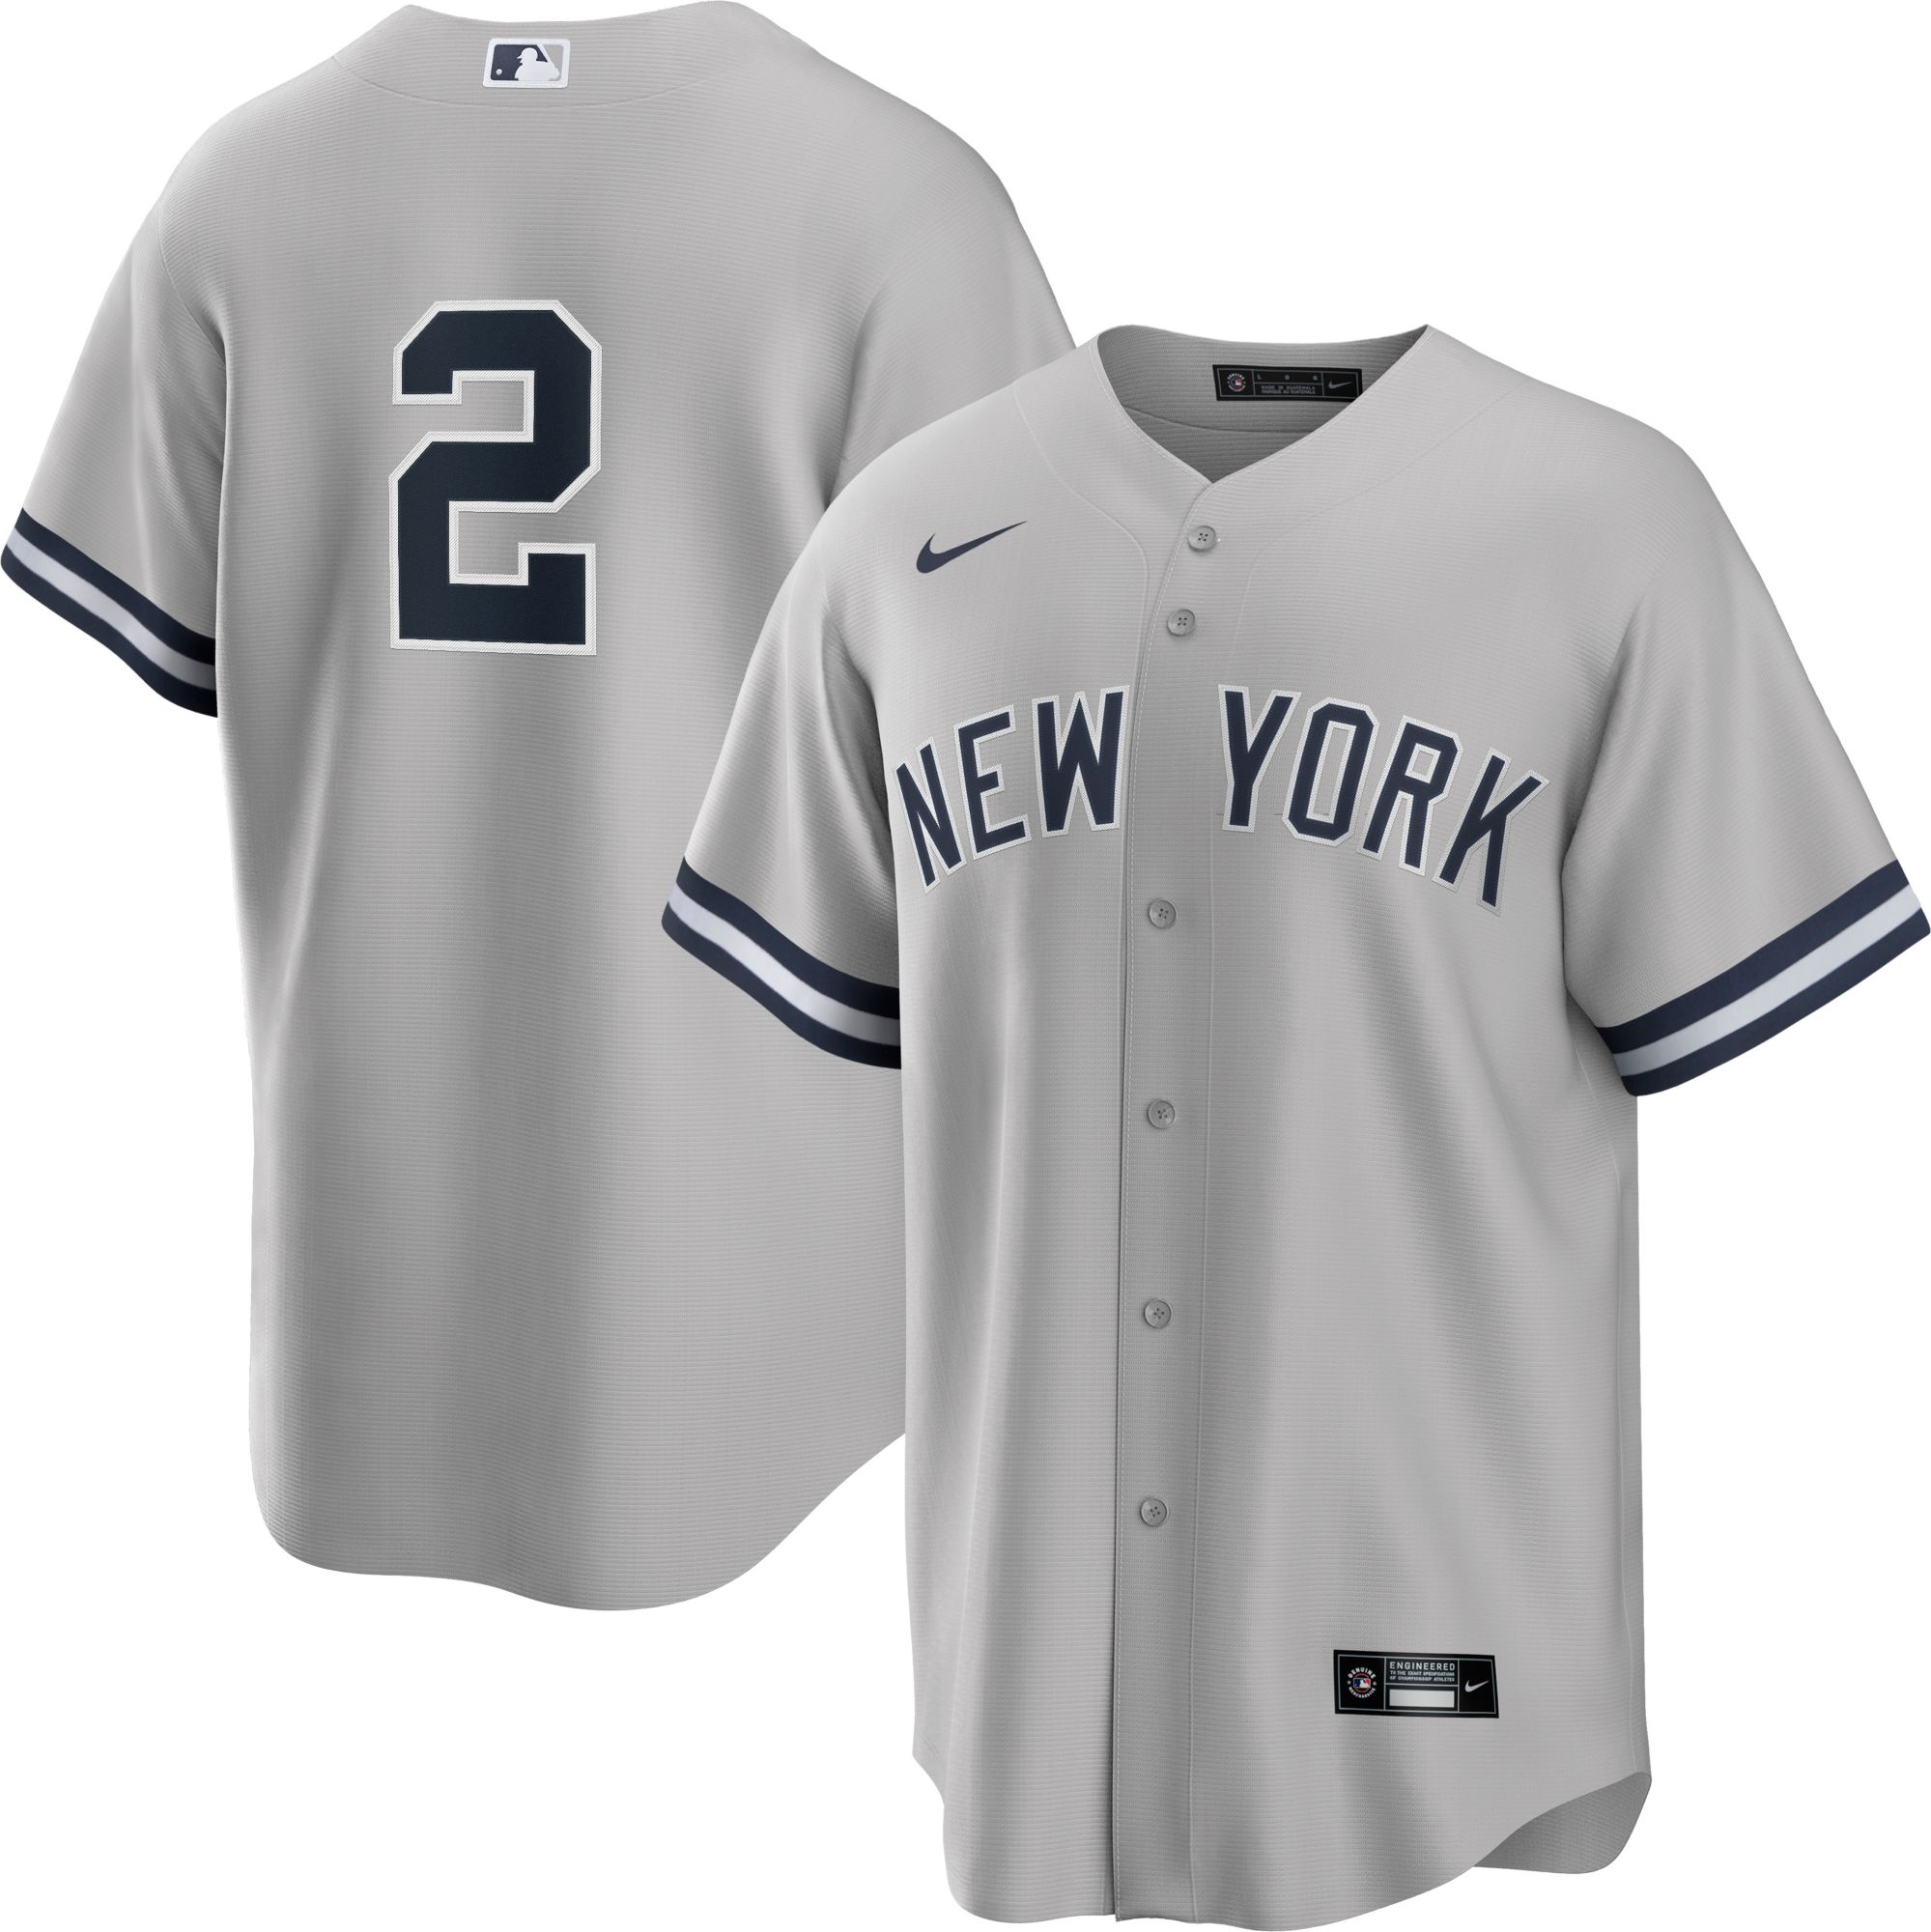 Aaron Judge Yankees Jersey #99 Men's Size 52 XXL New With Tags